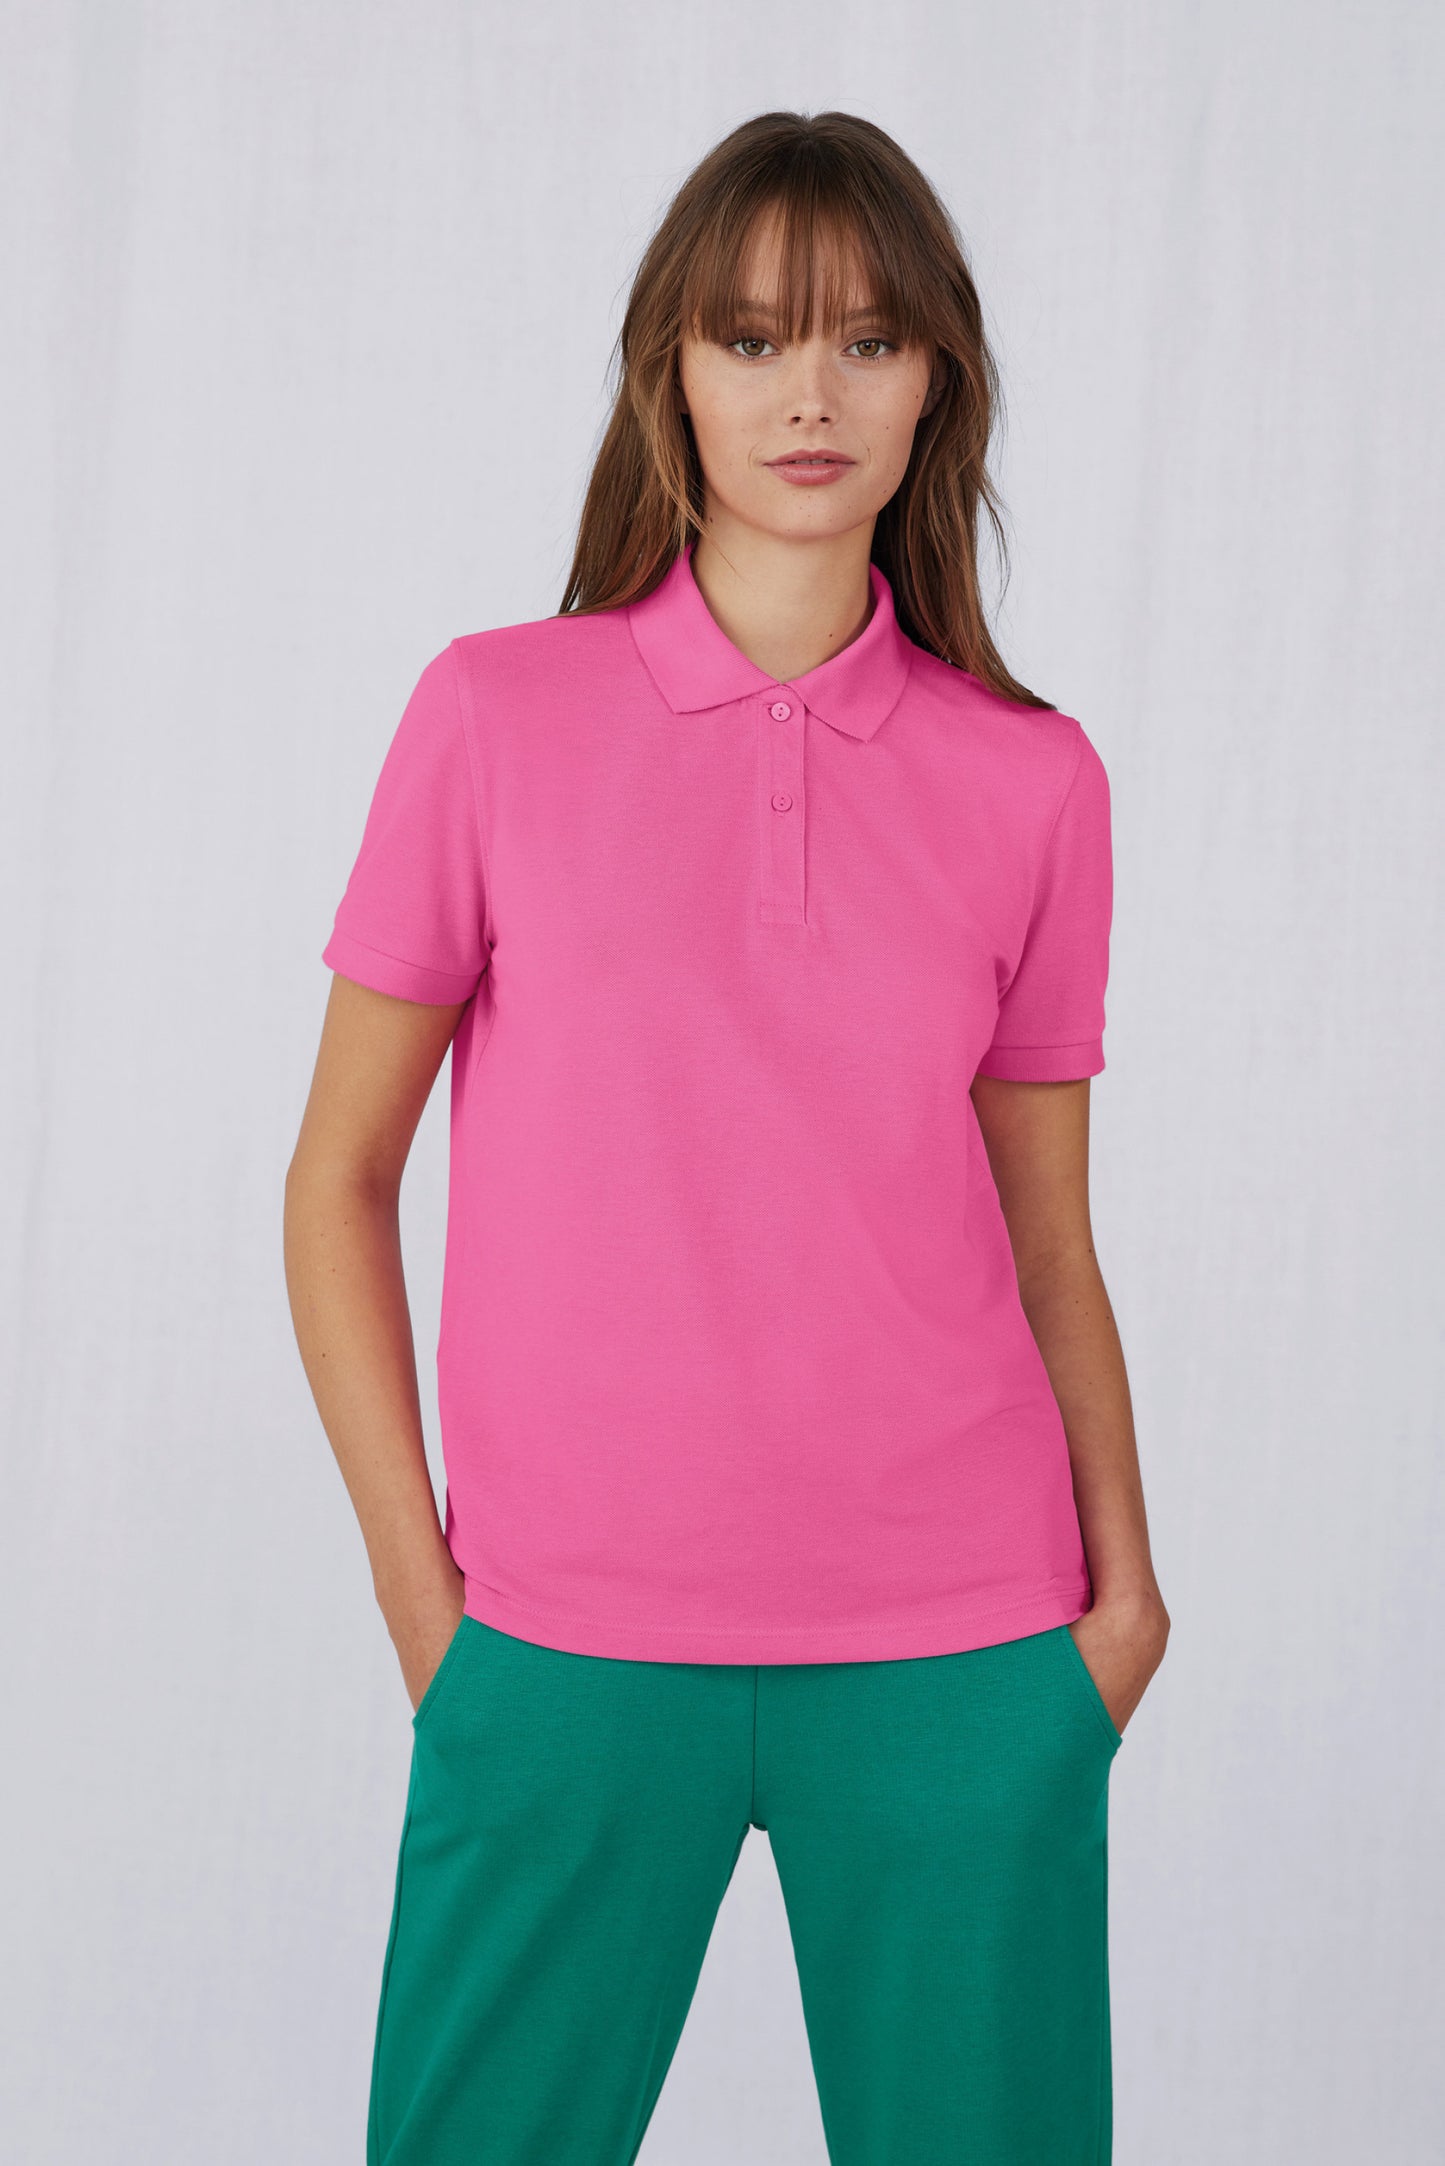 CGPW465 - MY ECO POLO 65/35 Femme manches courtes